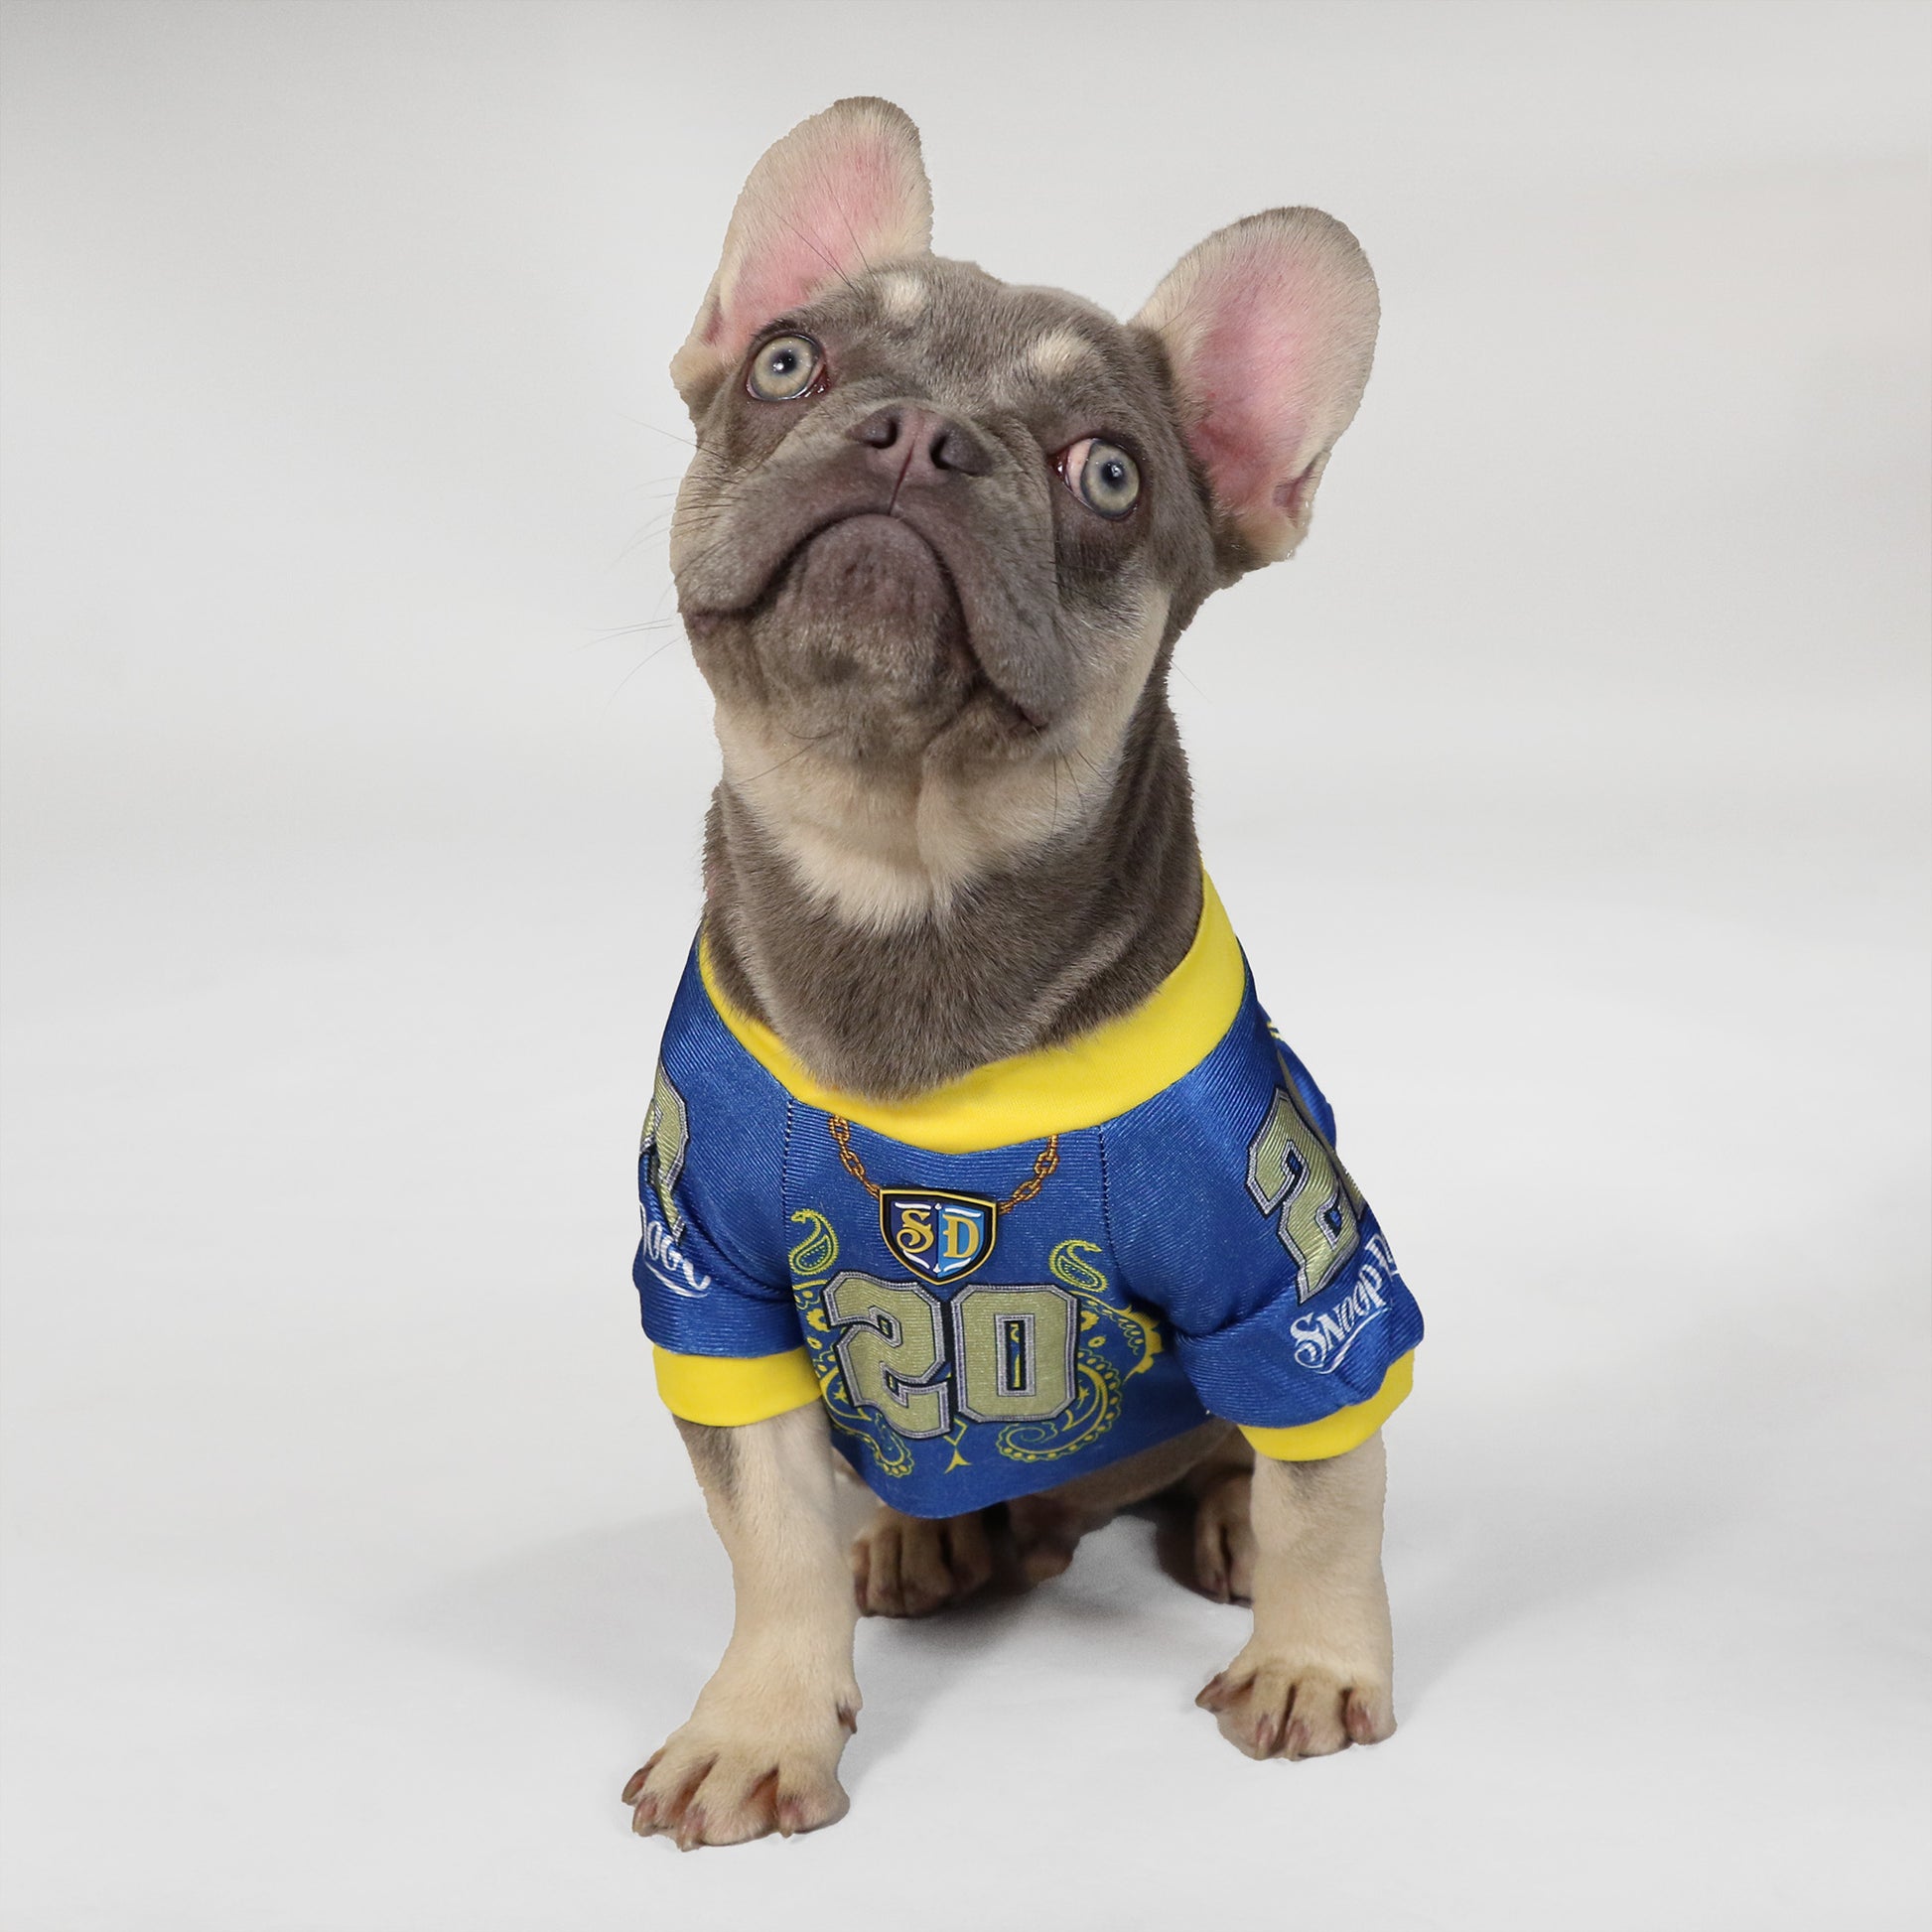 Snoop Doggie Doggs Deluxe Pet Jersey Off the Chain